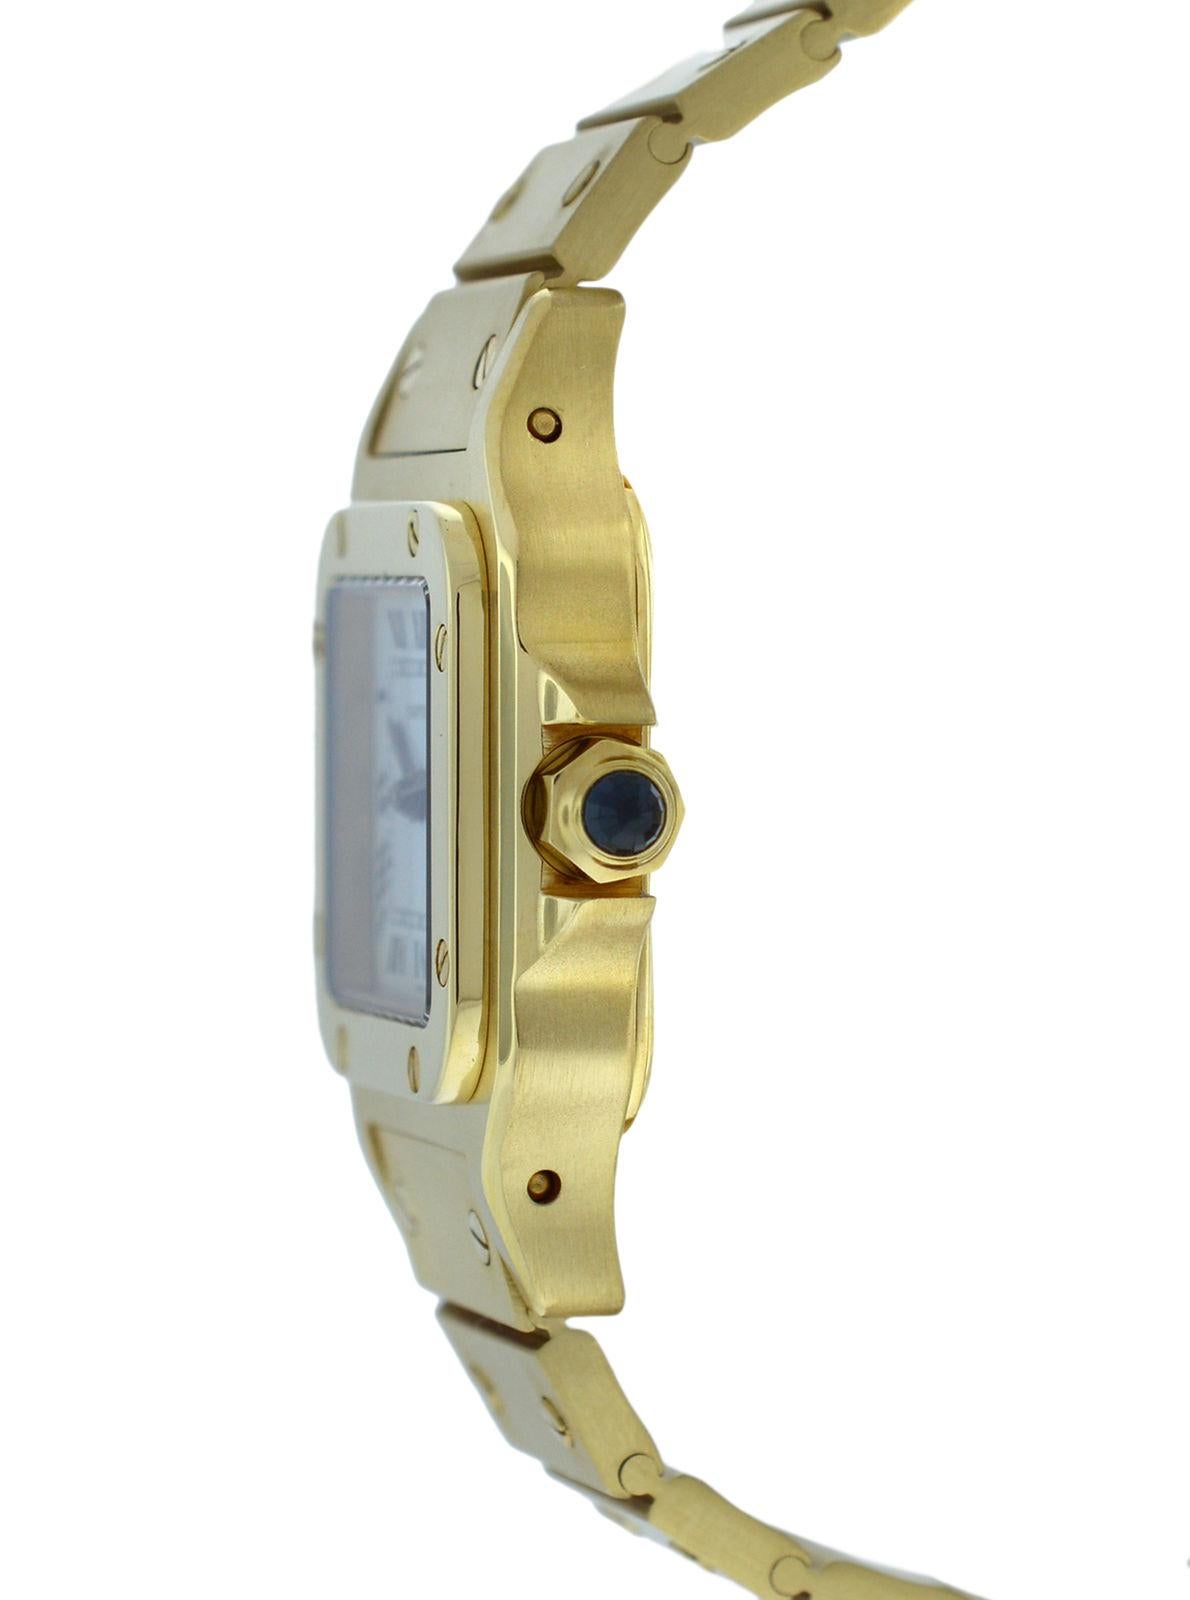 Brand	Cartier
Model	Santos
Gender	Ladies
Condition	Pre-owned
Movement	Swiss Automatic
Case Material	18K Yellow Gold (extra aftermarket gold diamond set bezel)
Bracelet / Strap Material	
18K Yellow Gold

Clasp / Buckle Material	
18K Yellow